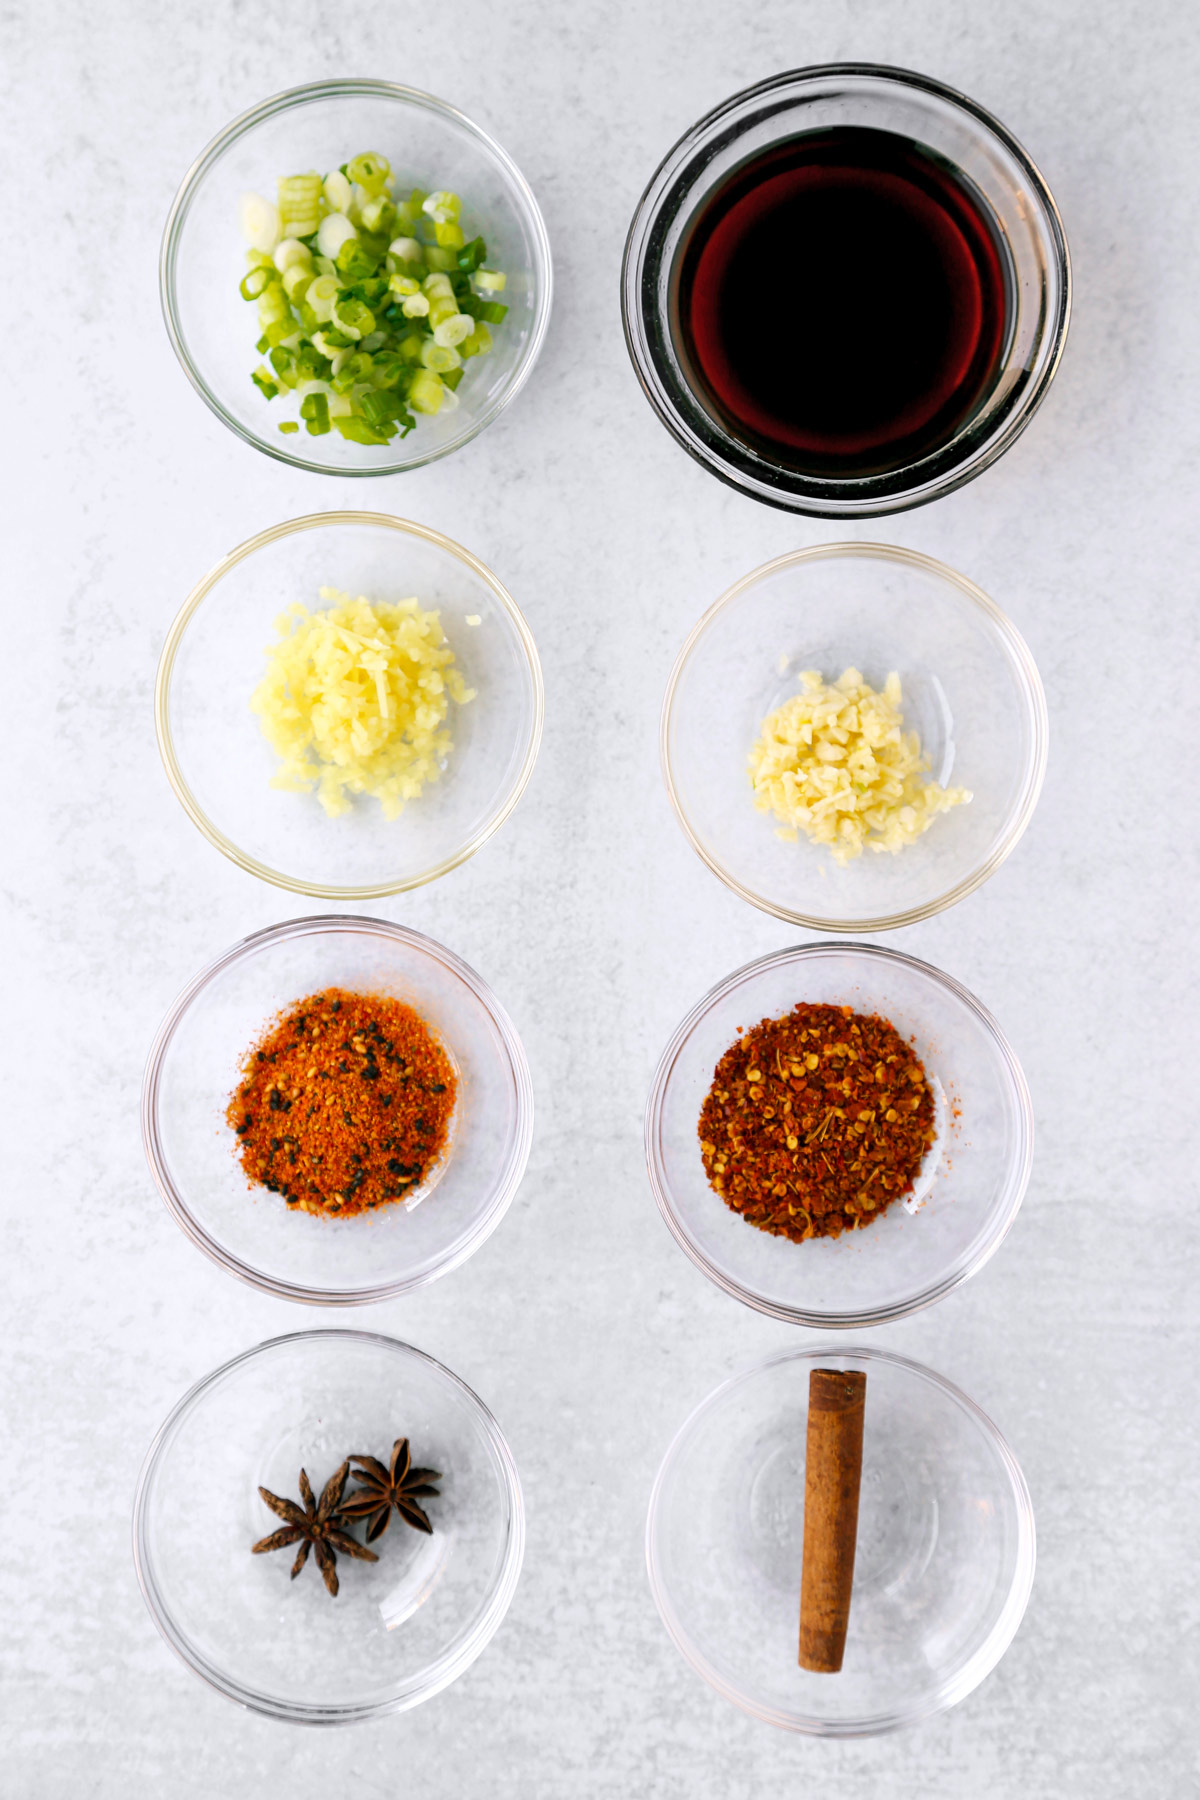 Ingredients for chili oil (rayu)